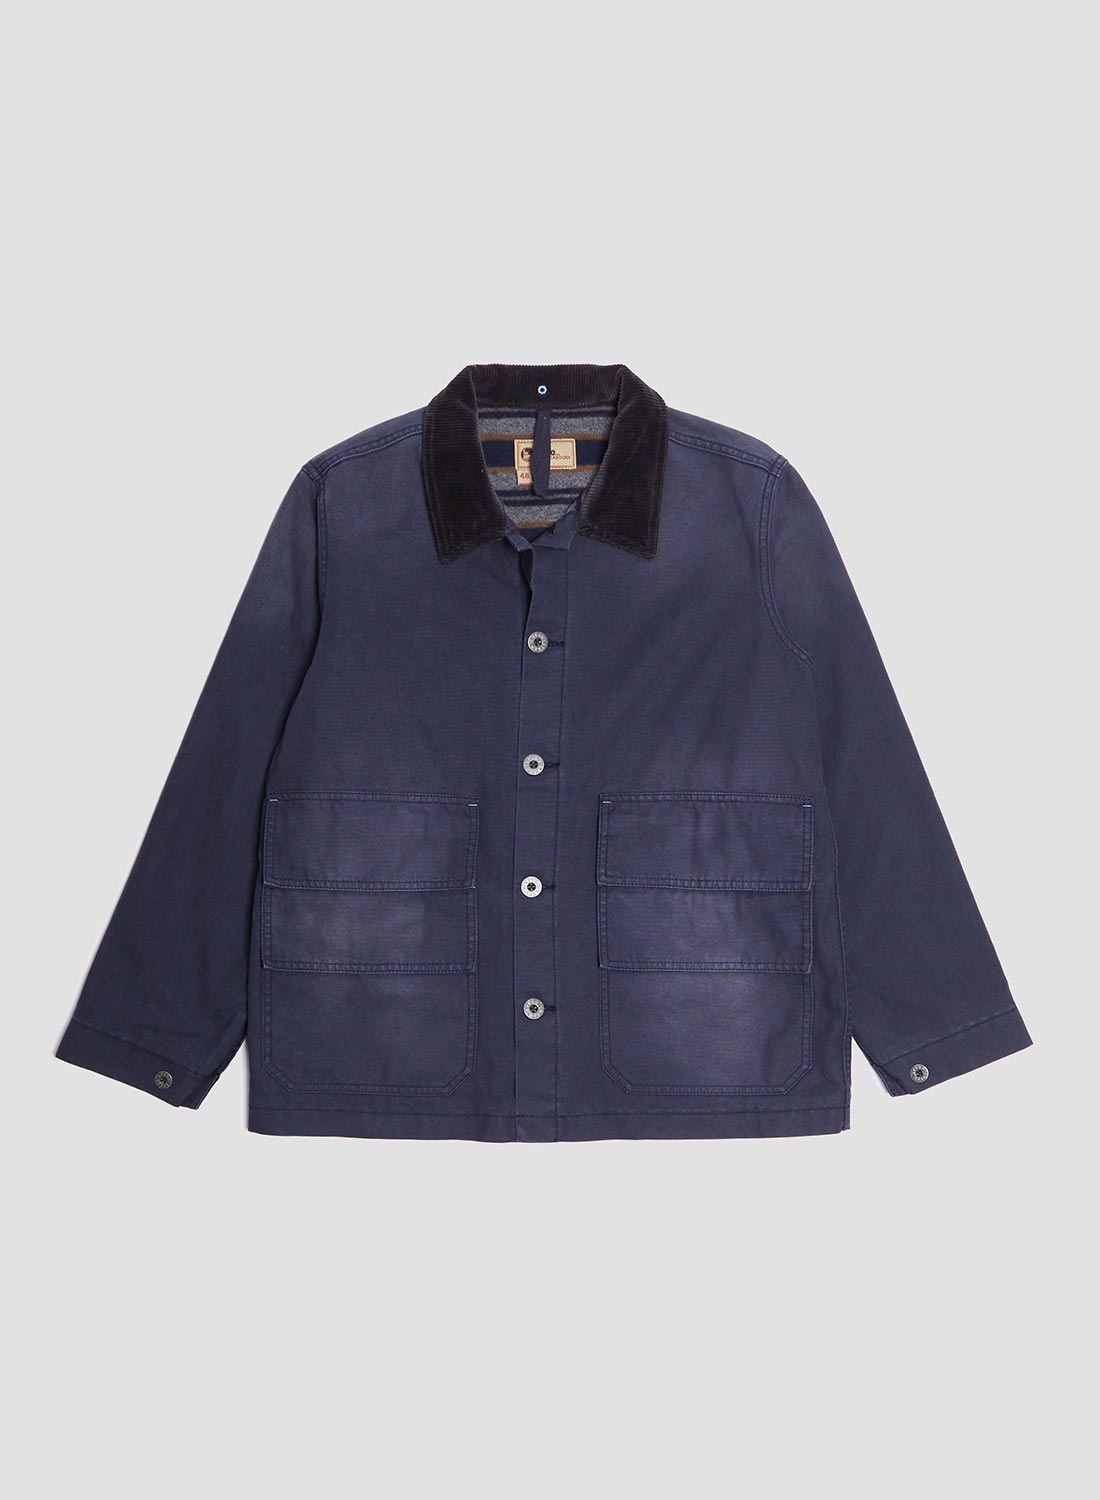 Hunting Chore Jacket Canvas in Black Navy - 1